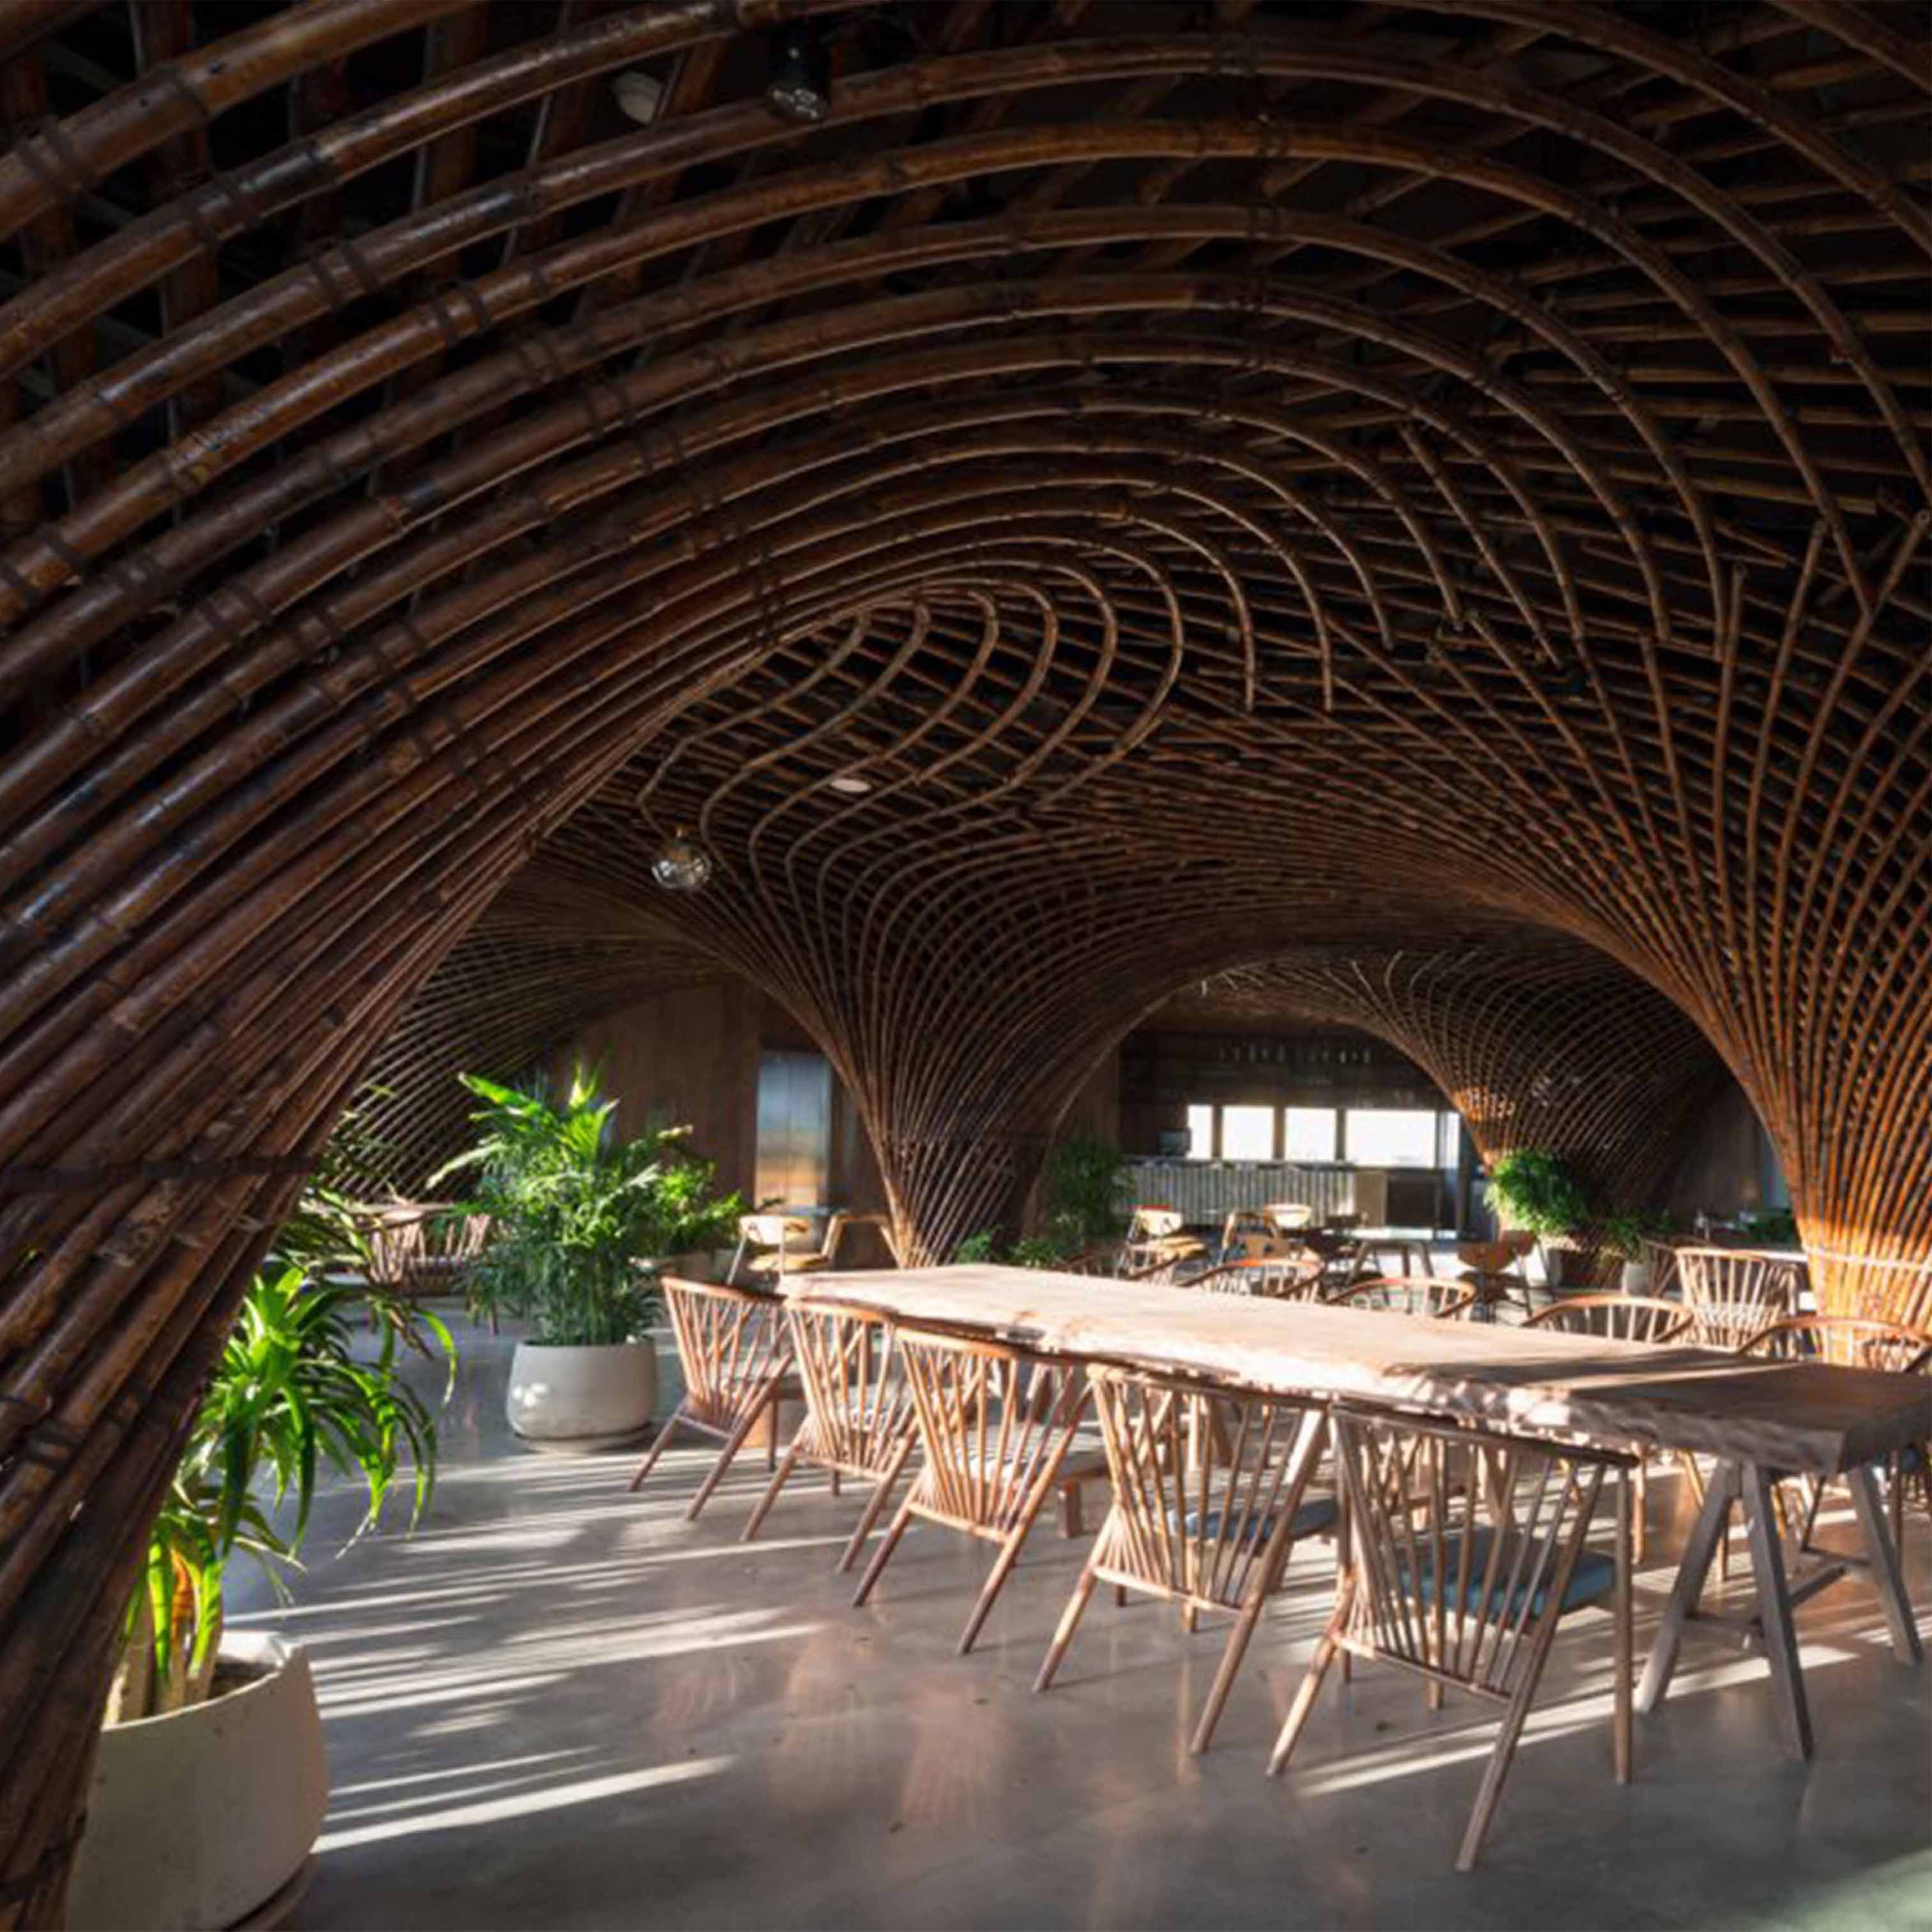 Cafe design inspired by Bamboo trees